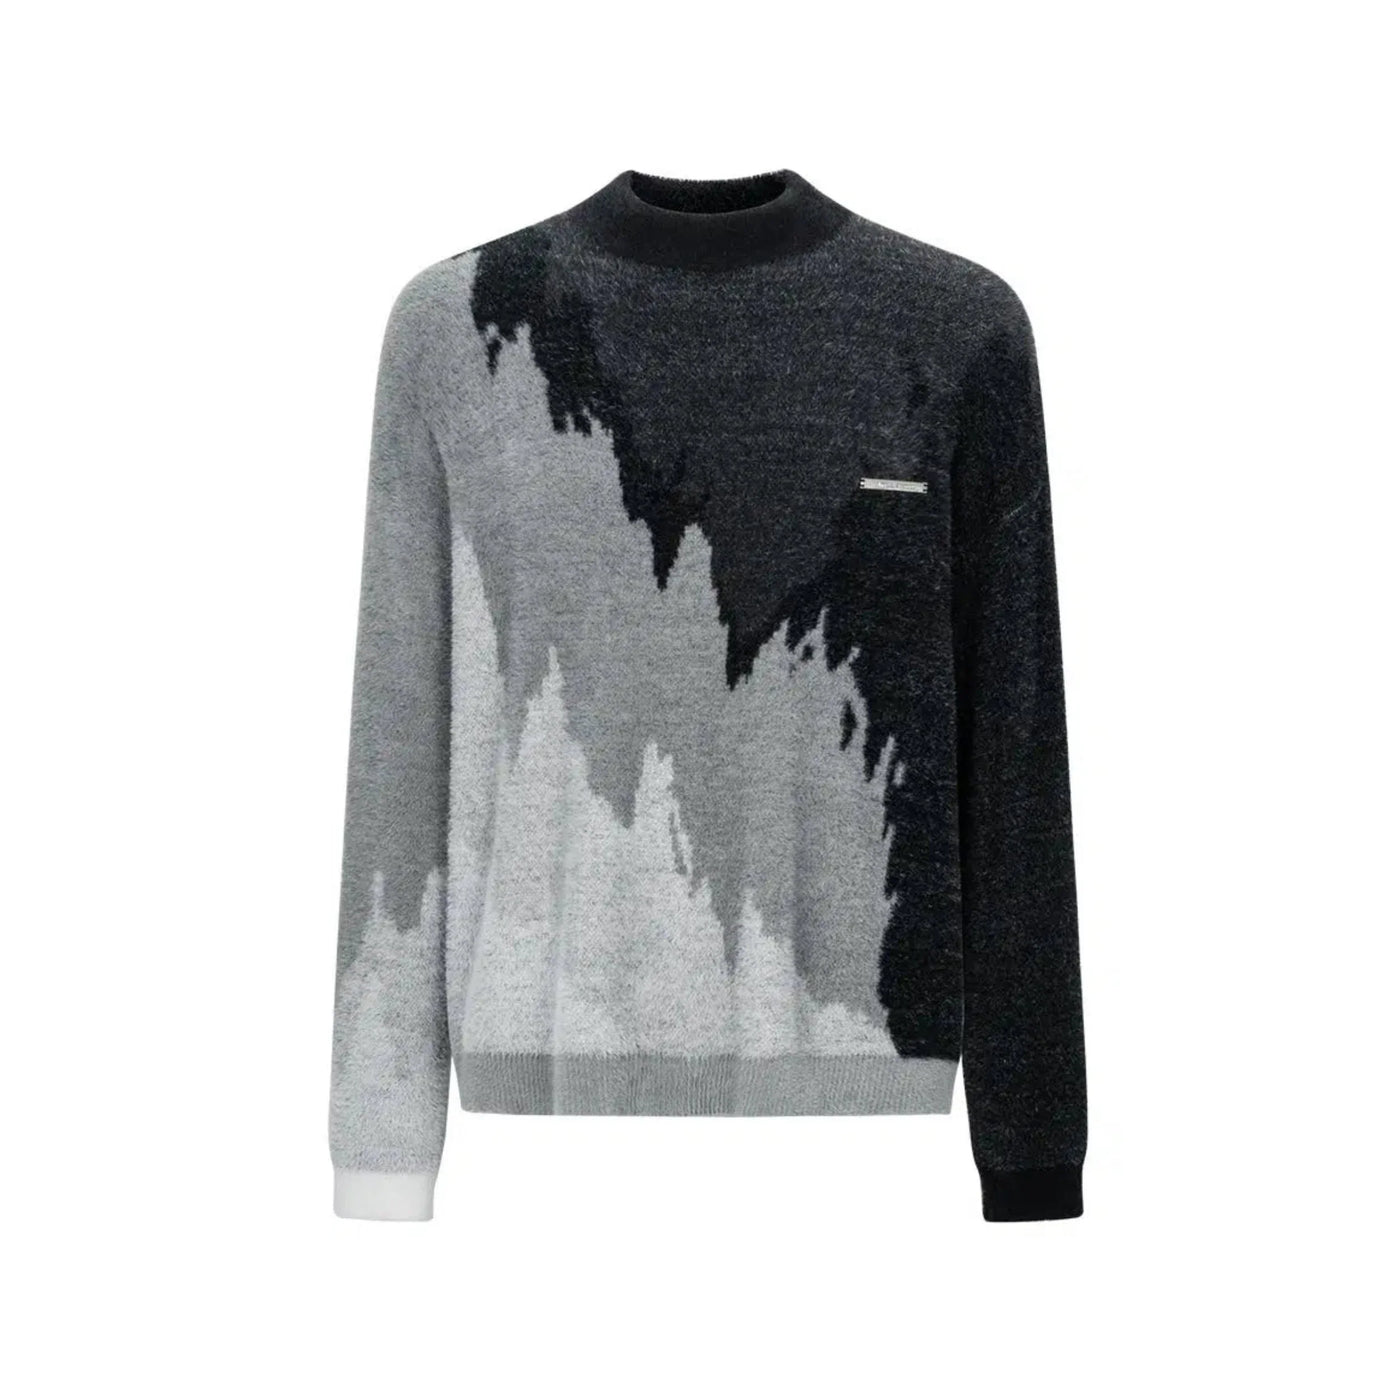 TIWILLTANG Tri Tone Drip Effect Sweater Korean Street Fashion Sweater By TIWILLTANG Shop Online at OH Vault